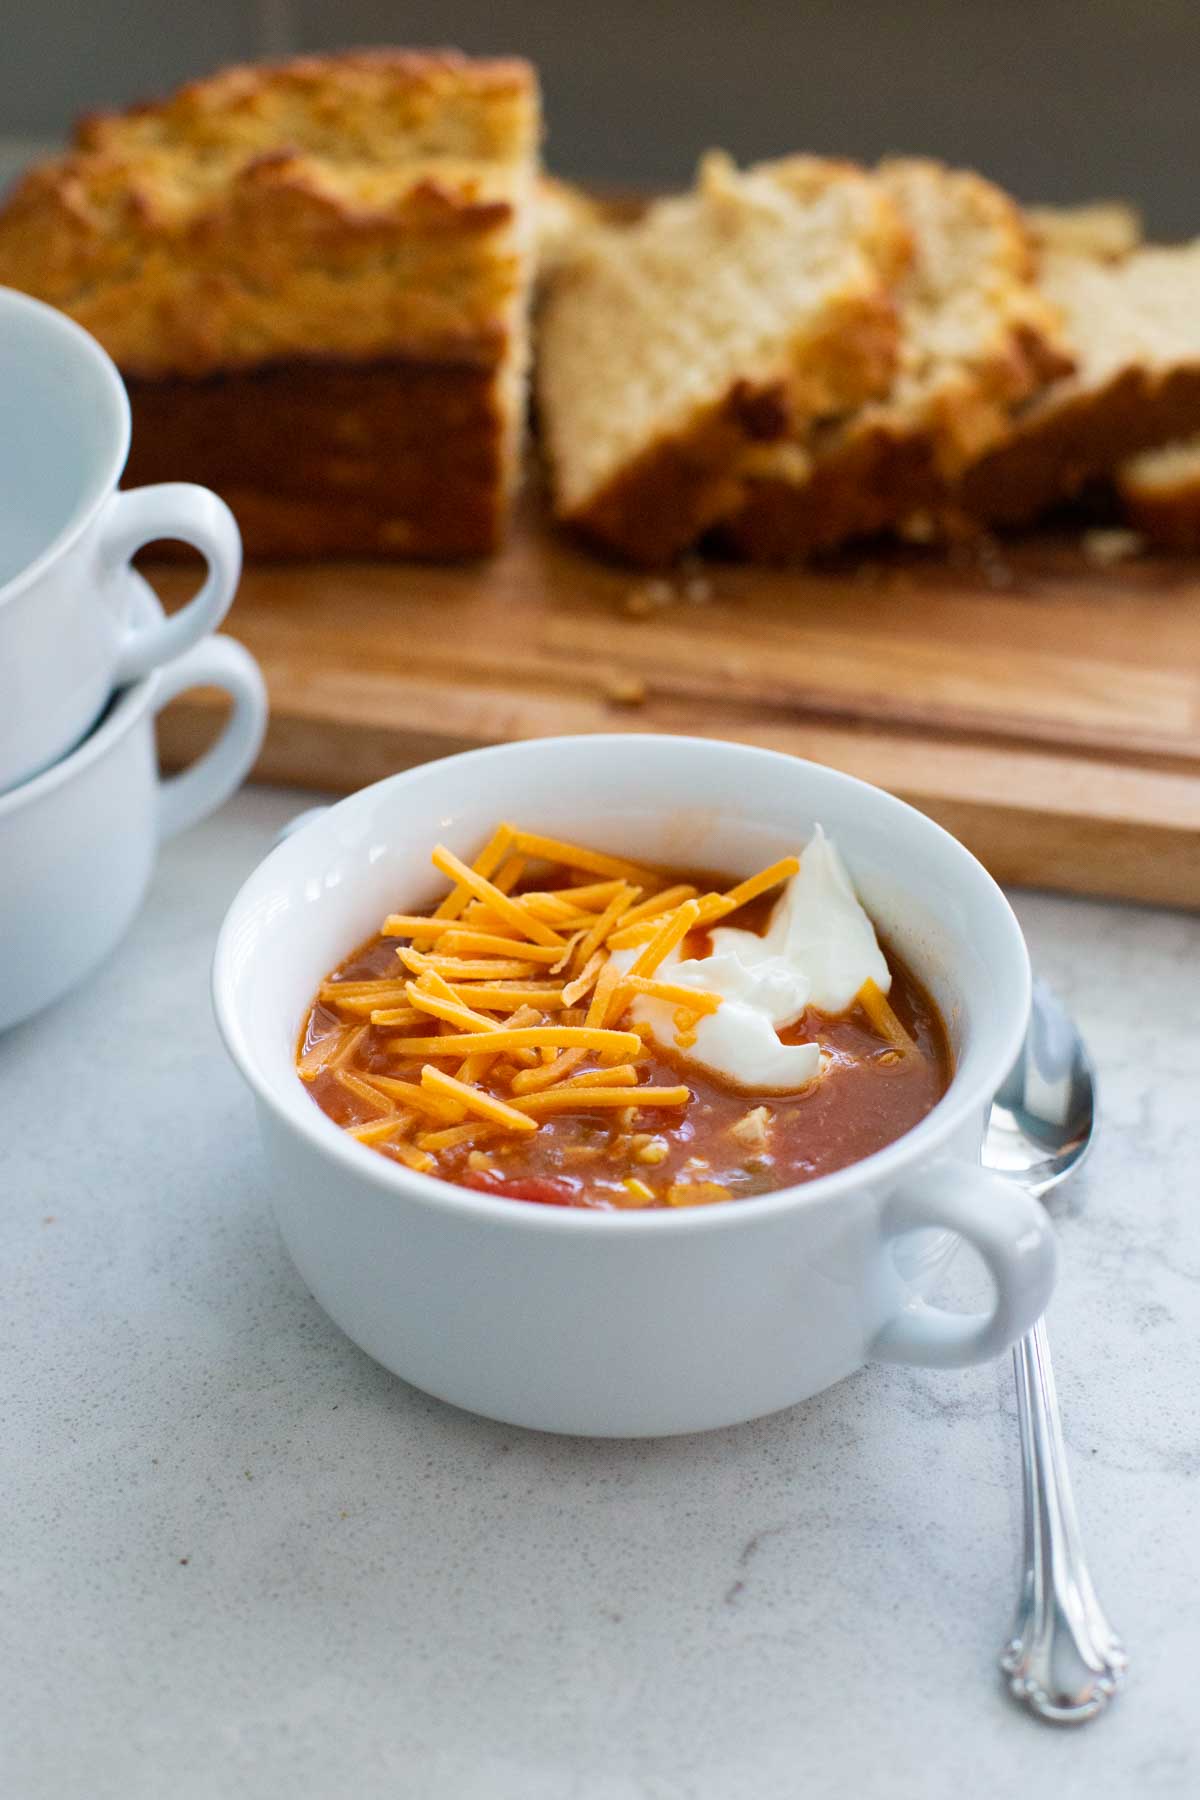 The taco soup is in a bowl with shredded cheese and a dollop of sour cream. Sliced bread is on a board in the back.